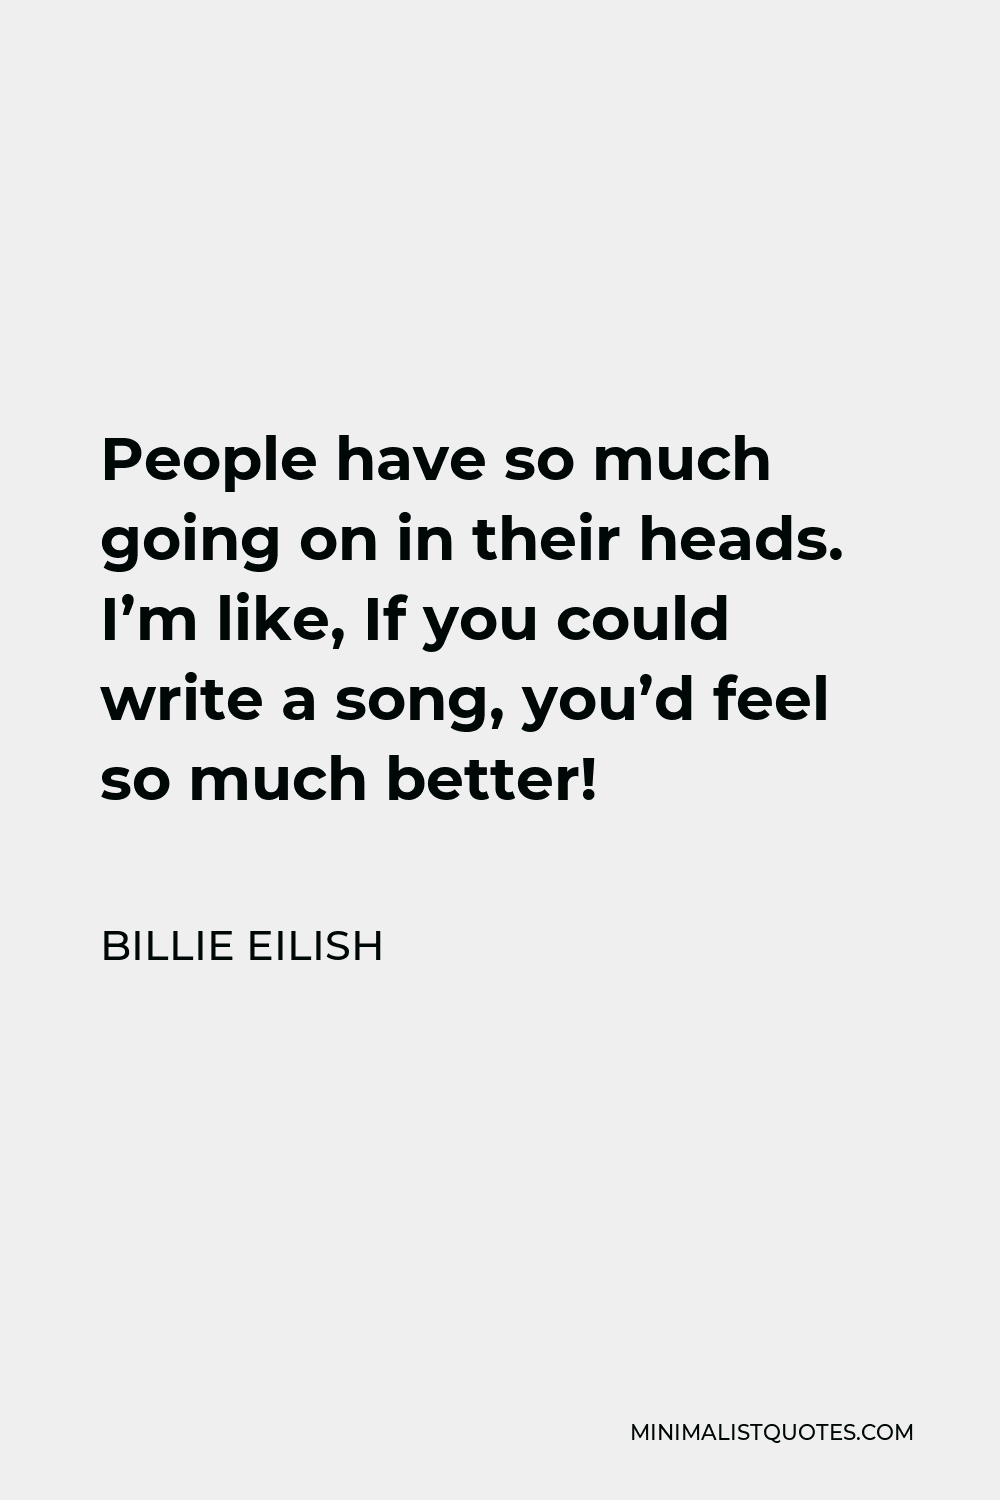 Billie Eilish Quote - People have so much going on in their heads. I’m like, If you could write a song, you’d feel so much better!